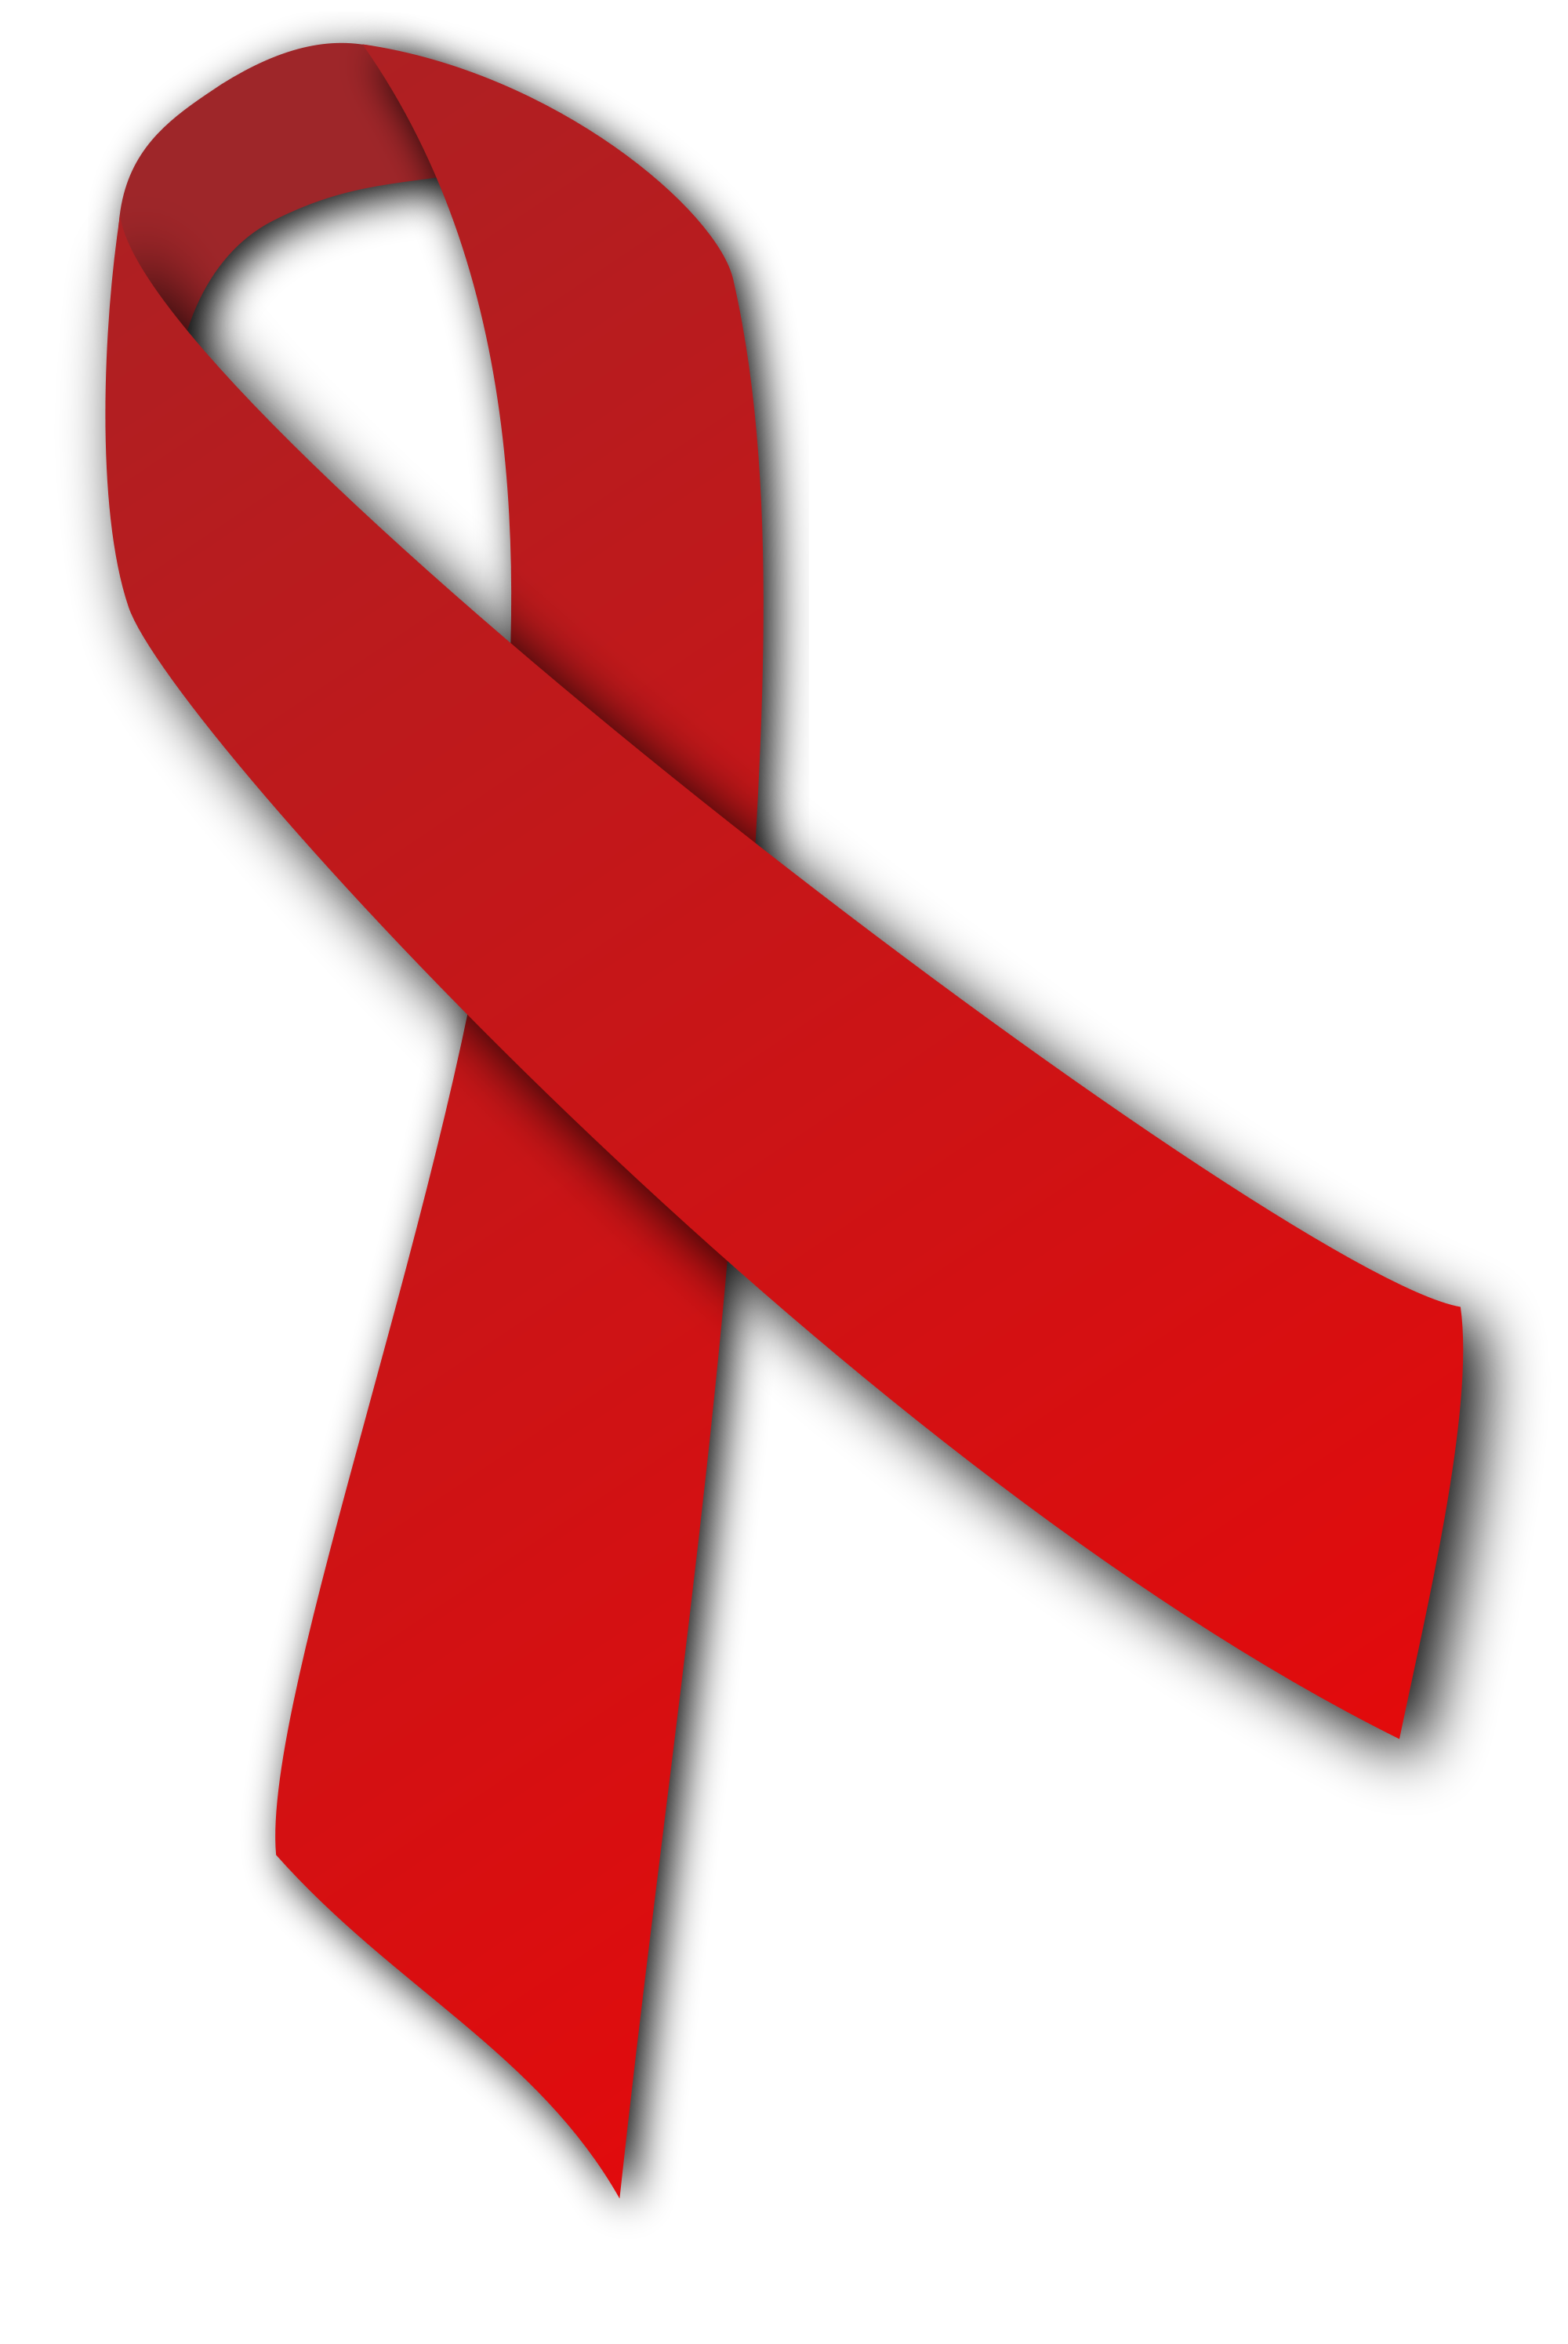 World AIDS Day 2016: Delivering multicultural HIV messages